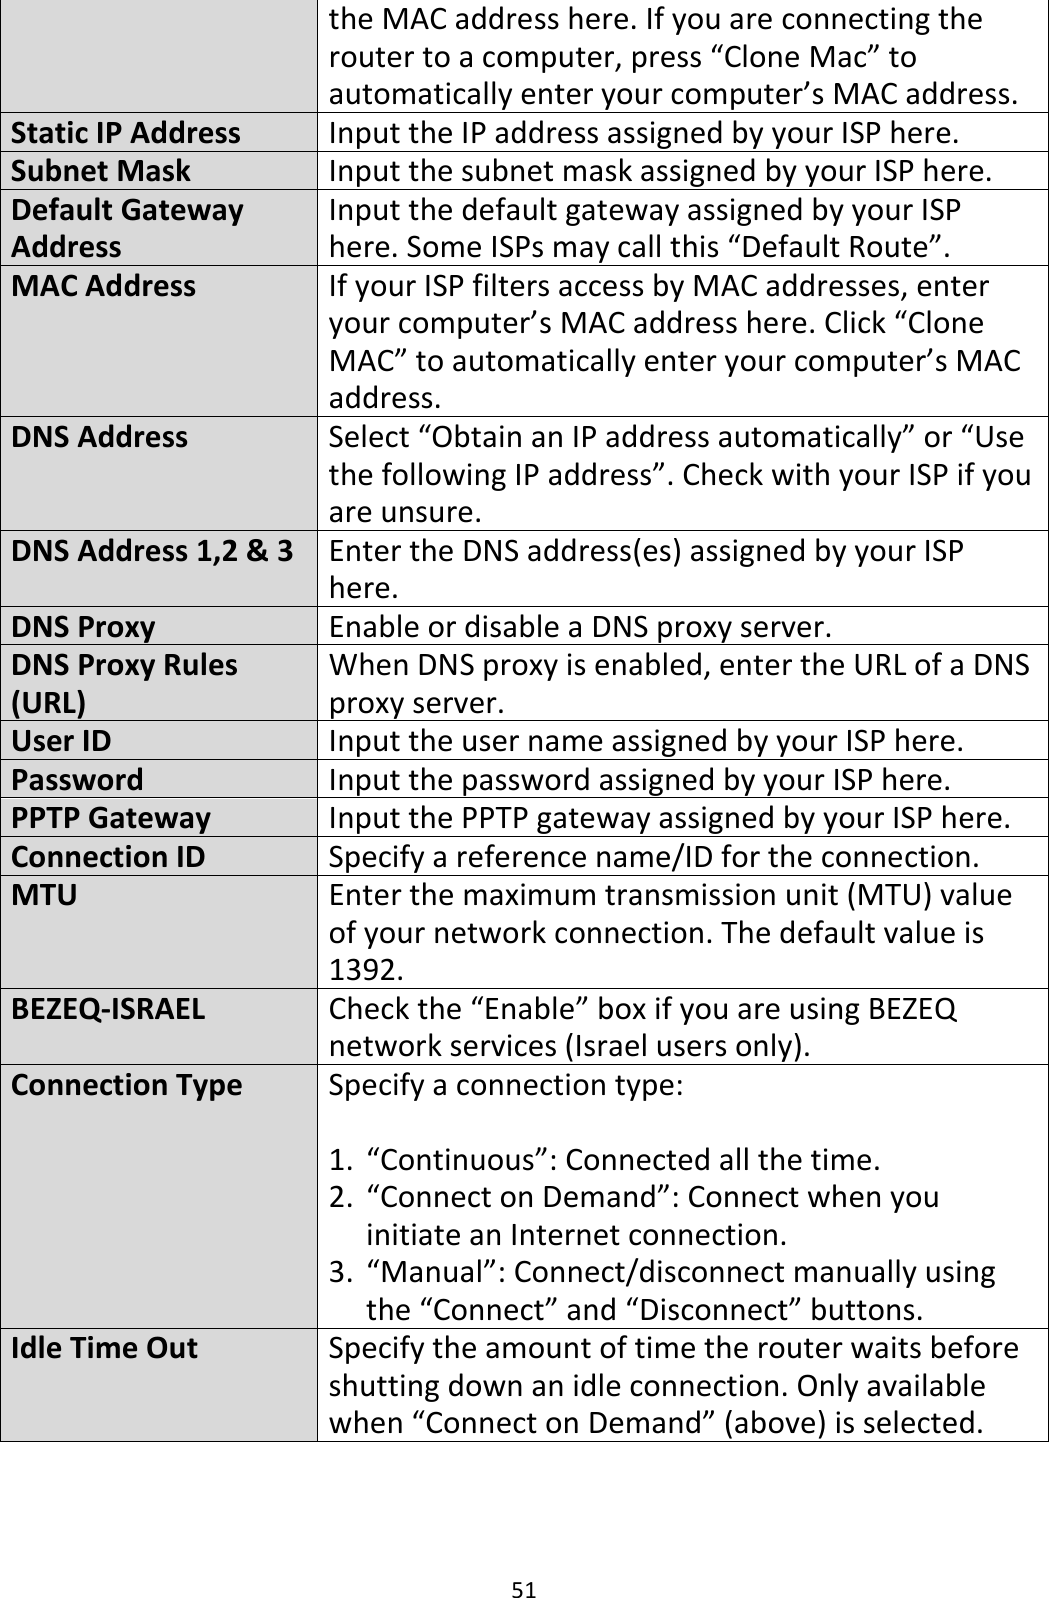 51 the MAC address here. If you are connecting the router to a computer, press “Clone Mac” to automatically enter your computer’s MAC address. Static IP Address Input the IP address assigned by your ISP here. Subnet Mask Input the subnet mask assigned by your ISP here. Default Gateway Address Input the default gateway assigned by your ISP here. Some ISPs may call this “Default Route”. MAC Address If your ISP filters access by MAC addresses, enter your computer’s MAC address here. Click “Clone MAC” to automatically enter your computer’s MAC address. DNS Address Select “Obtain an IP address automatically” or “Use the following IP address”. Check with your ISP if you are unsure. DNS Address 1,2 &amp; 3 Enter the DNS address(es) assigned by your ISP here. DNS Proxy Enable or disable a DNS proxy server. DNS Proxy Rules (URL) When DNS proxy is enabled, enter the URL of a DNS proxy server. User ID Input the user name assigned by your ISP here. Password Input the password assigned by your ISP here. PPTP Gateway Input the PPTP gateway assigned by your ISP here. Connection ID Specify a reference name/ID for the connection. MTU Enter the maximum transmission unit (MTU) value of your network connection. The default value is 1392. BEZEQ-ISRAEL Check the “Enable” box if you are using BEZEQ network services (Israel users only). Connection Type Specify a connection type:  1. “Continuous”: Connected all the time. 2. “Connect on Demand”: Connect when you initiate an Internet connection. 3. “Manual”: Connect/disconnect manually using the “Connect” and “Disconnect” buttons. Idle Time Out Specify the amount of time the router waits before shutting down an idle connection. Only available when “Connect on Demand” (above) is selected.    